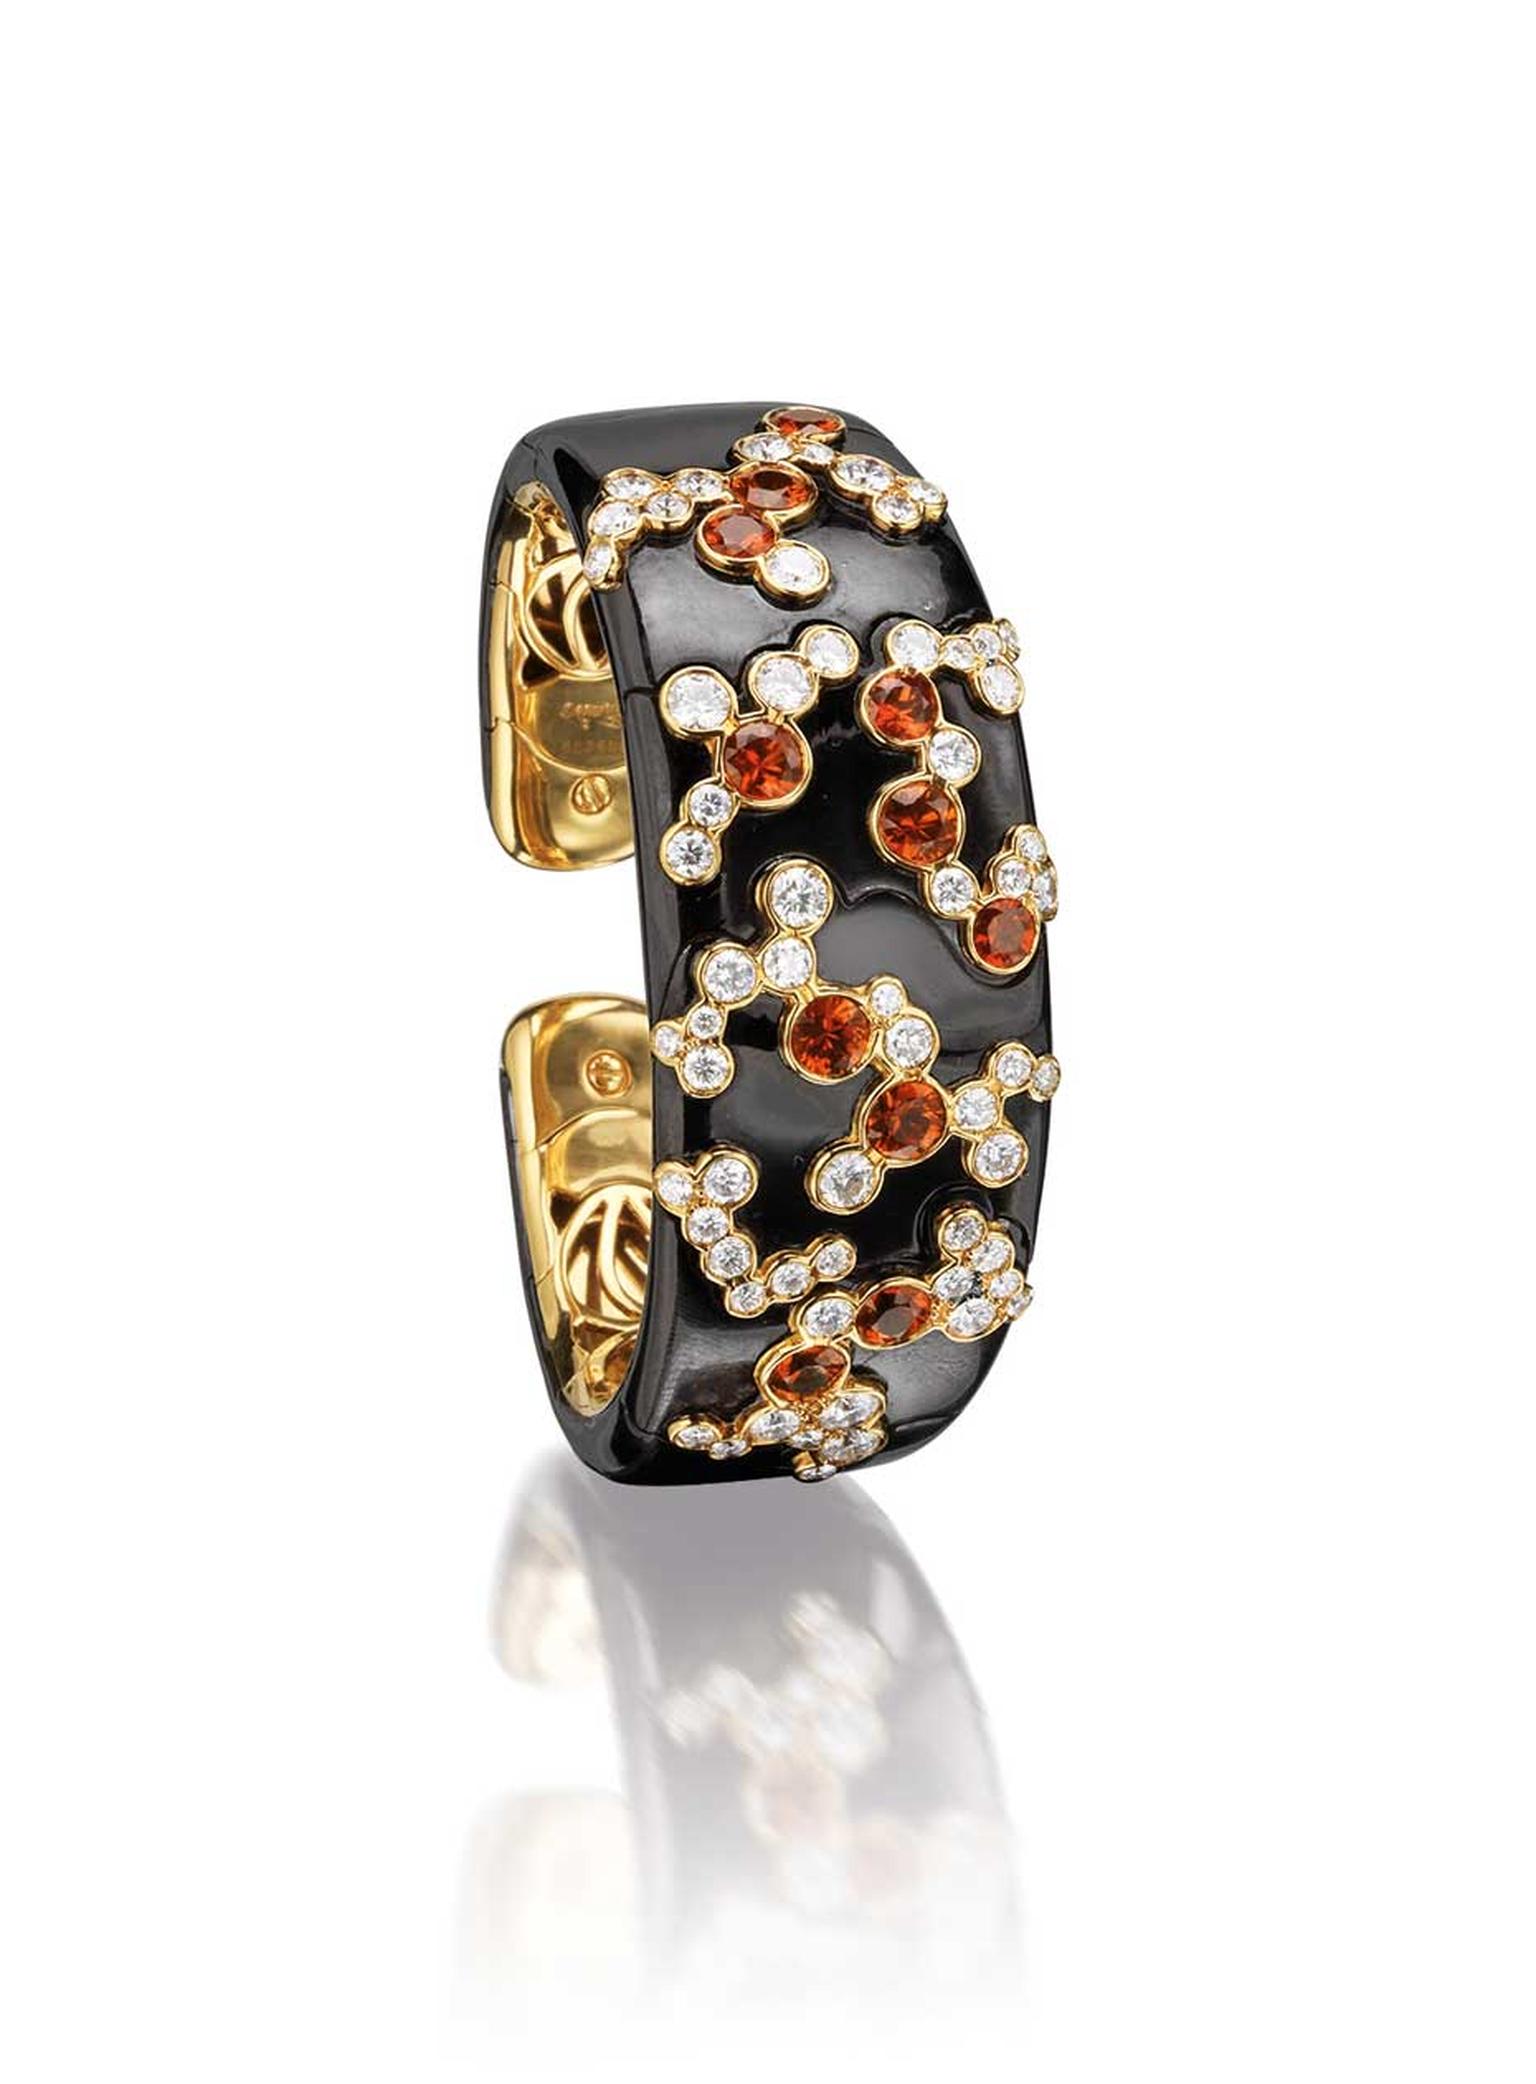 Marina B hinged bangle, influenced by Japanese culture and the cherry blossom. The bangle features brilliant-cut diamonds and circular-cut orange sapphires (estimate: £10,900-15,600).